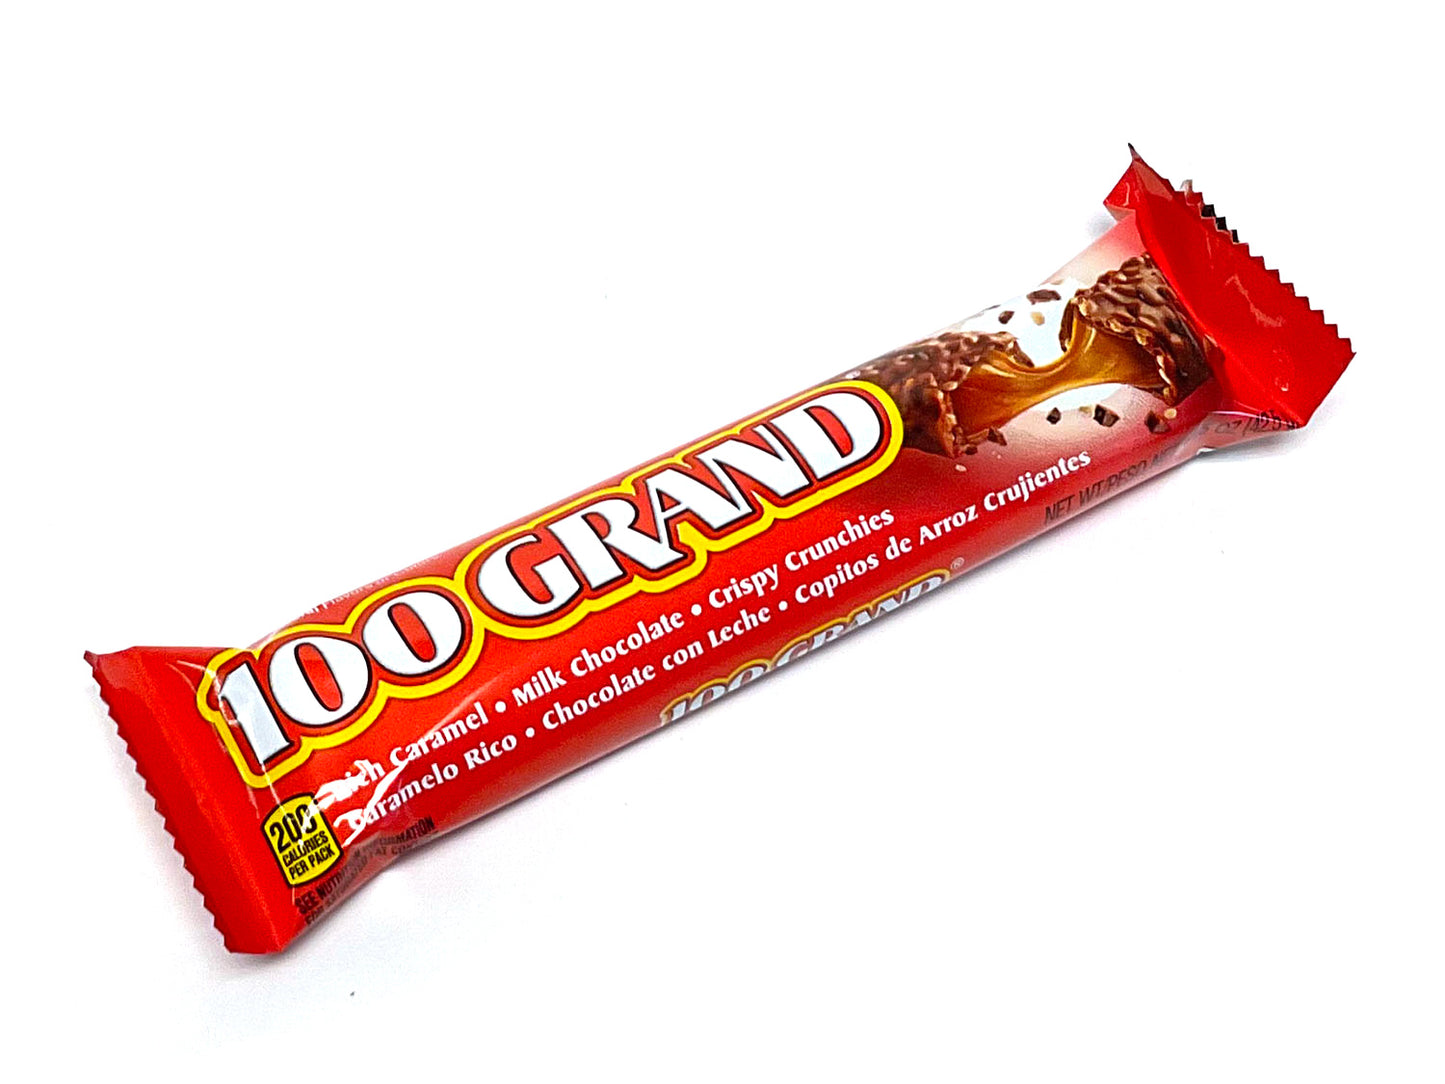 UNWRAPPING GRAND CANDY GOLD CHOCOLATE BARS 